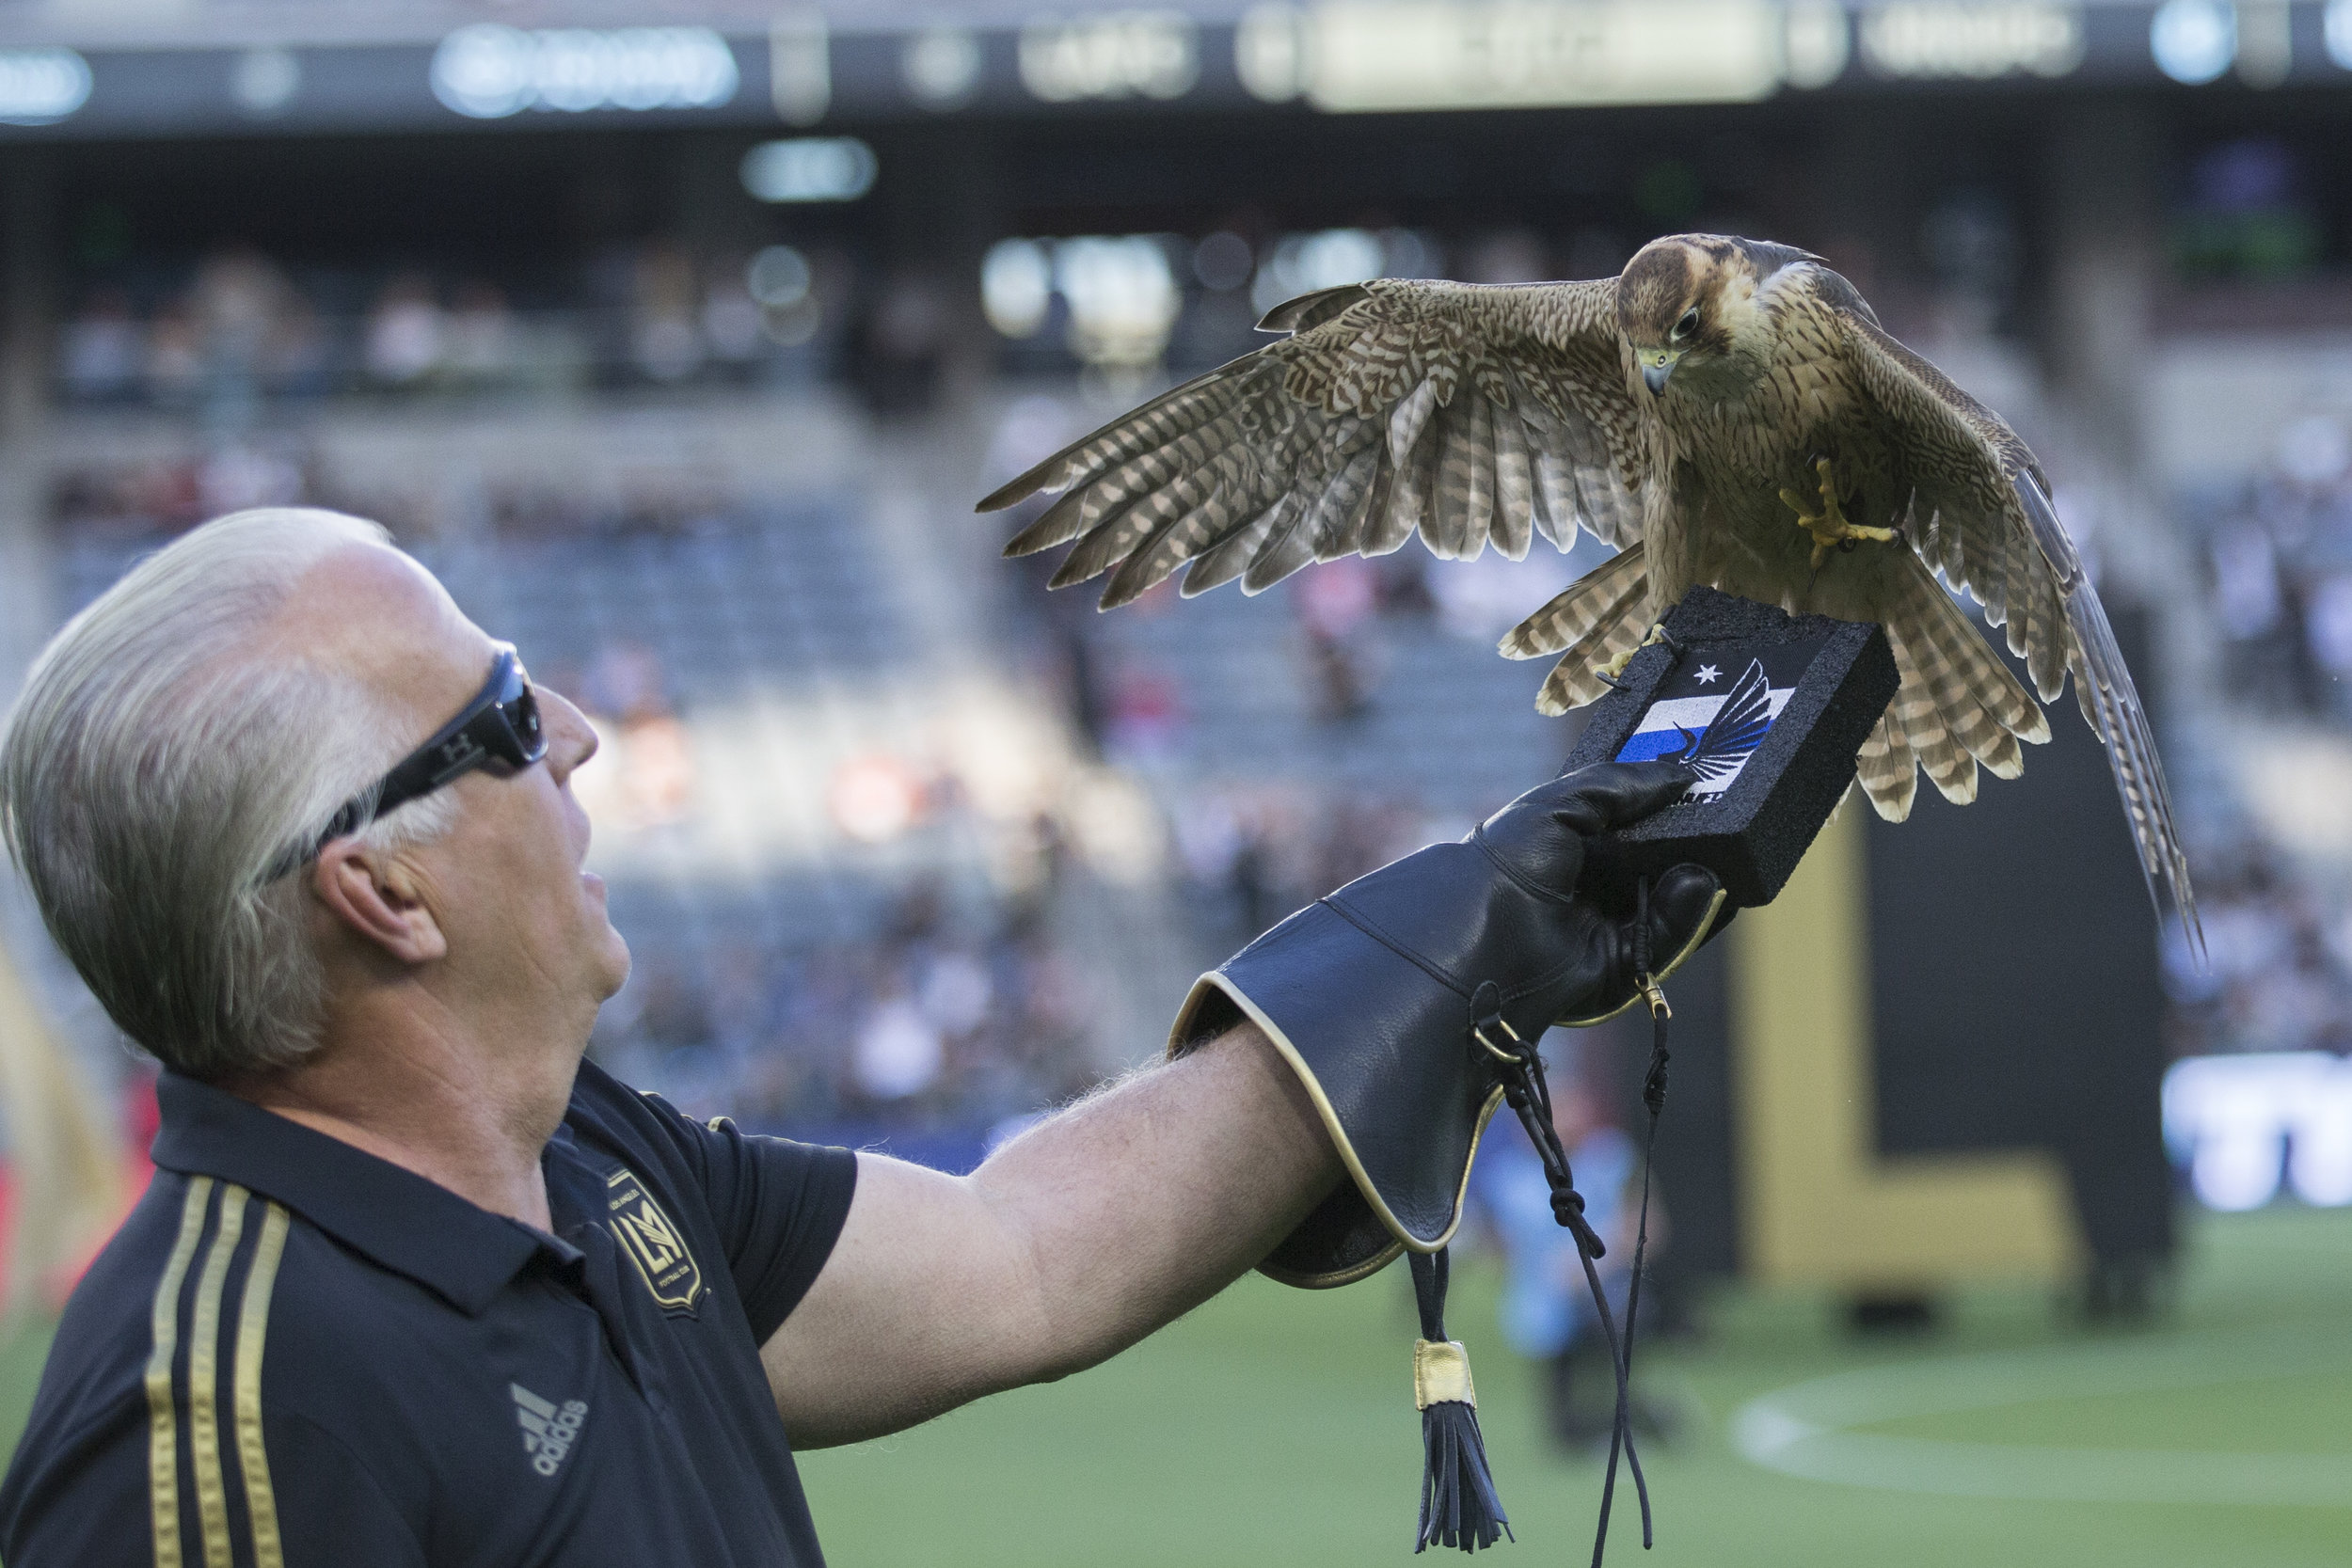  The Los Angeles Football Club (LAFC) mascot, Olly the Falcon, (named after Olvera Street) ends his pre-game fly around at the Banc of California Stadium on May 9, 2018. LAFC beat the Minnesota United Football Club 2-0. (Zane Meyer-Thornton/Corsair P